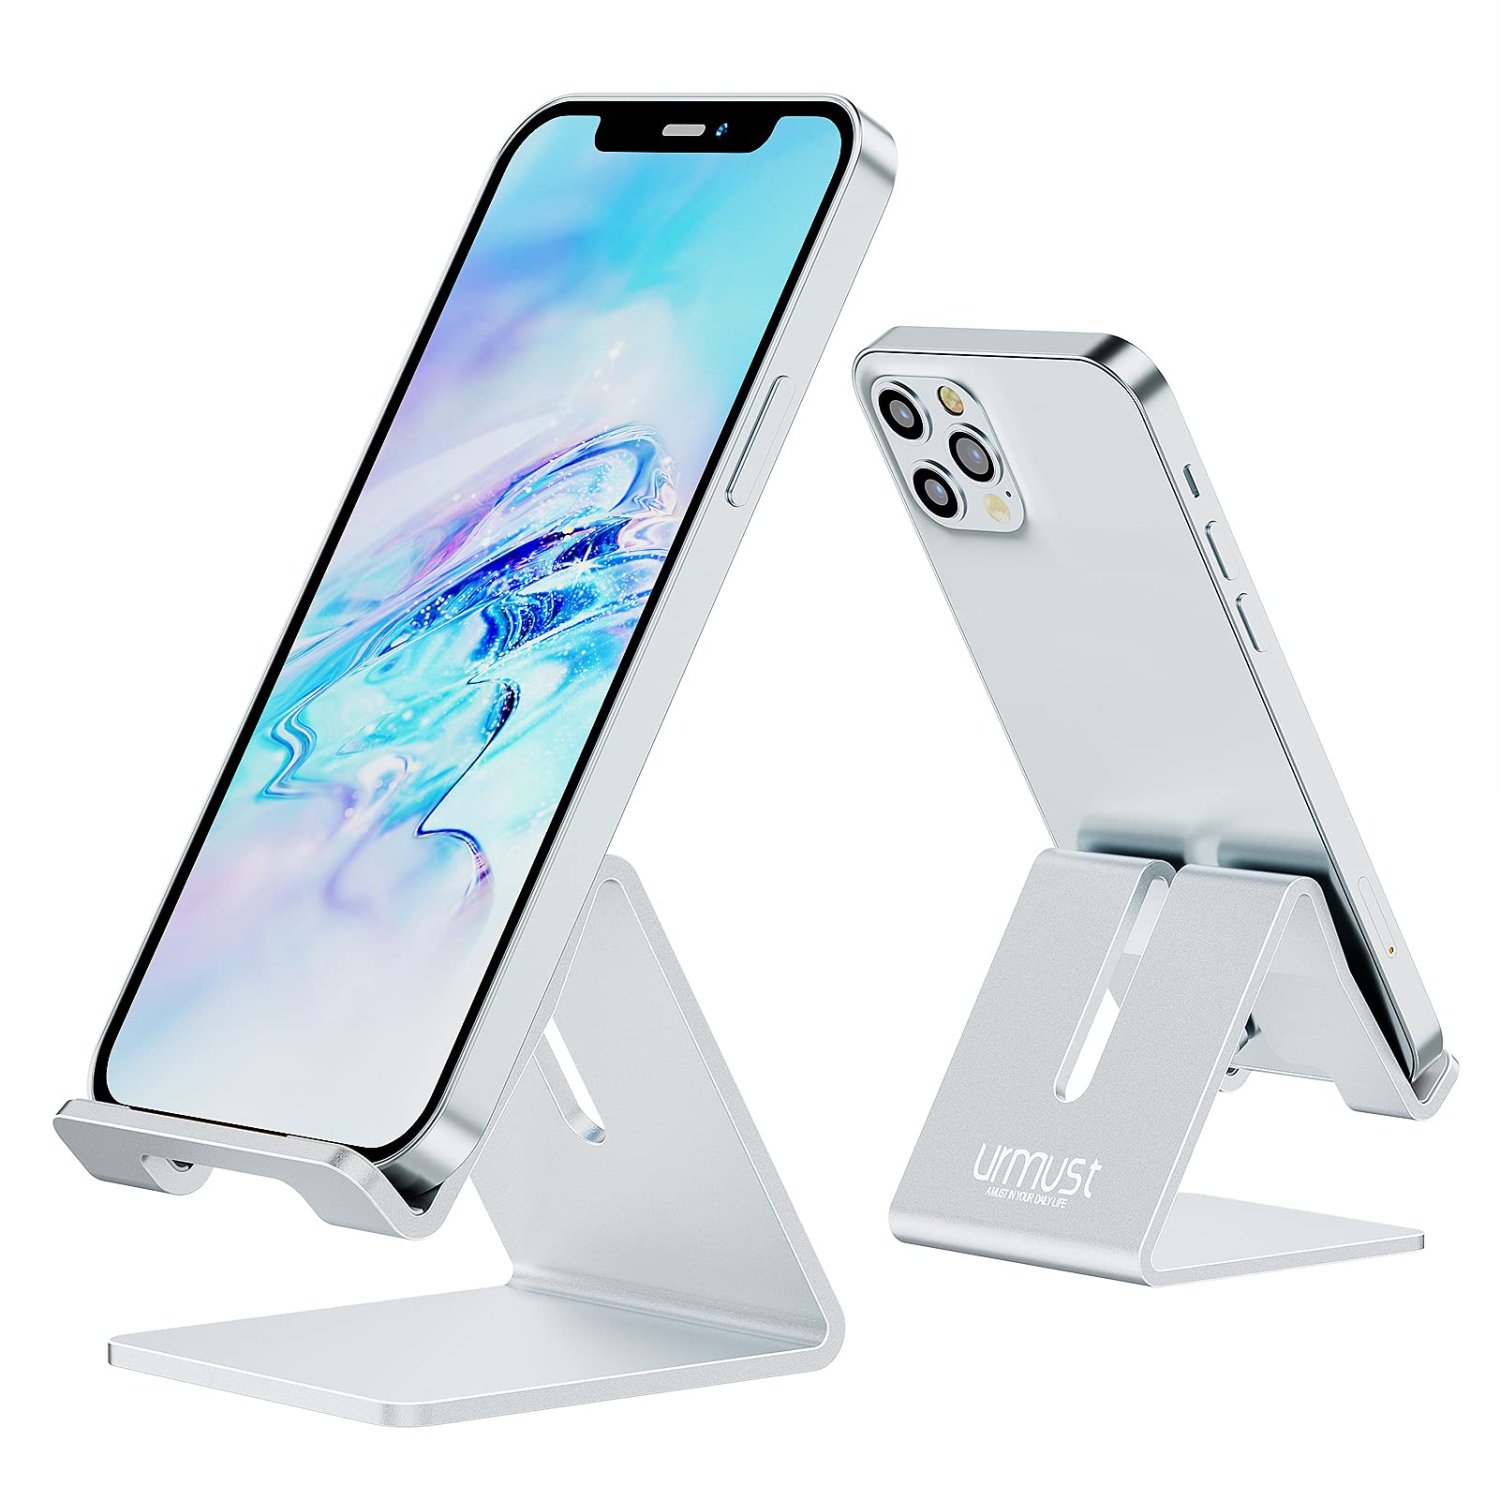 Desk Cell Phone Stand Phone Dock Cradle Holder Stand Compatible with Switch, All Android Smartphone, for iPhone 14,13, iPhone 12, 12 Pro, iPhone 11 Pro Xs Xs Max Xr X Accessories D